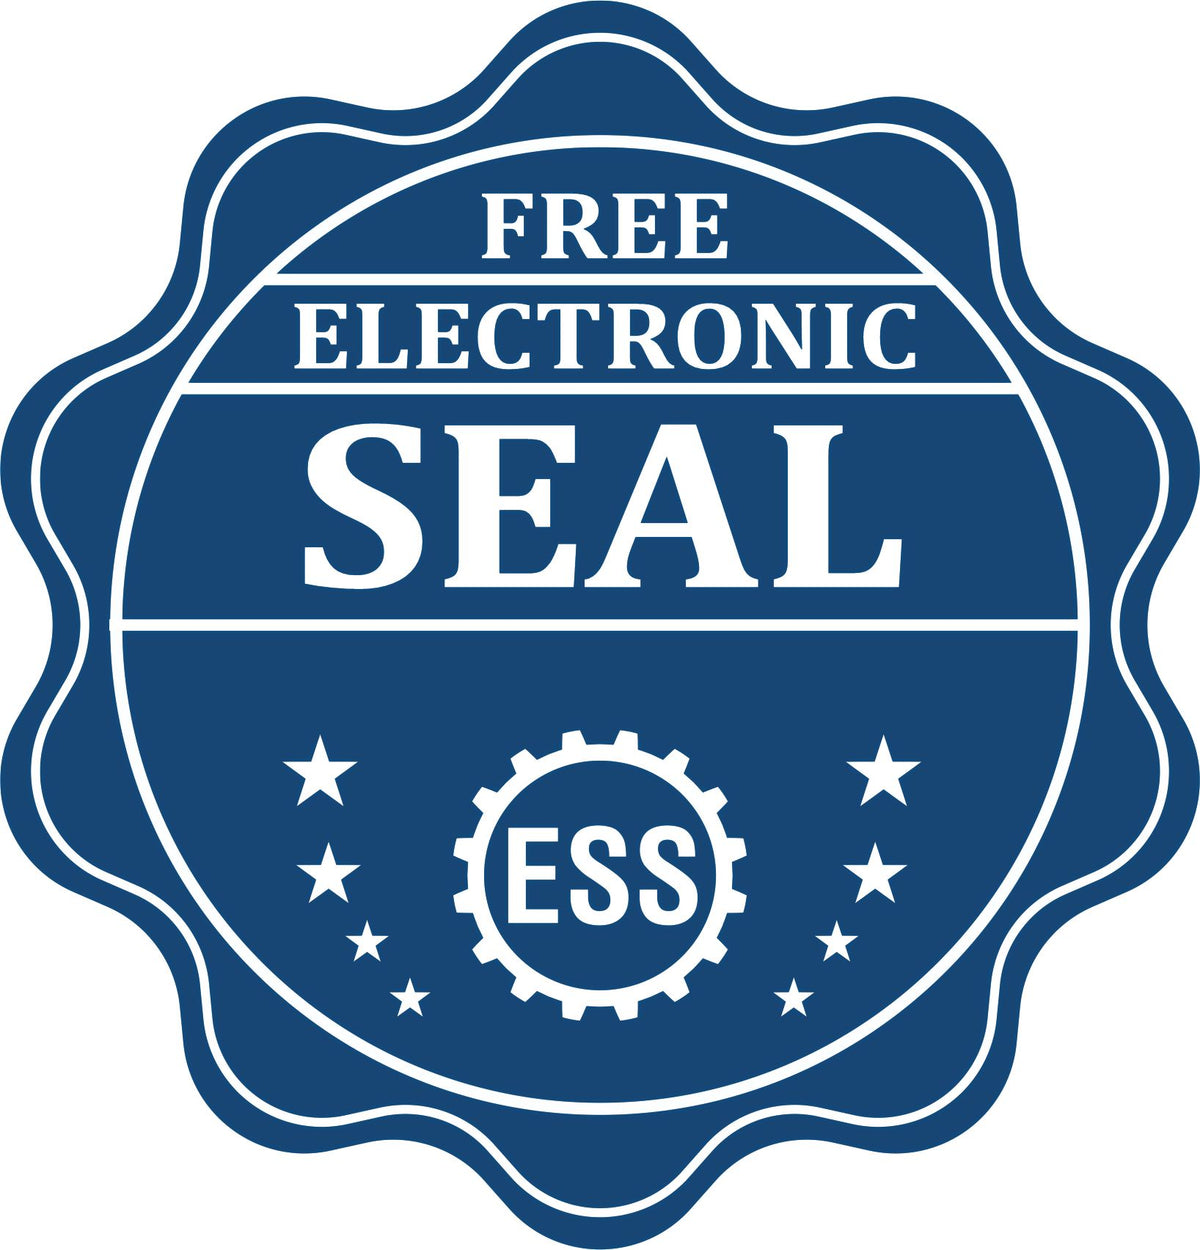 A badge showing a free electronic seal for the Hybrid Hawaii Geologist Seal with stars and the ESS gear on the emblem.